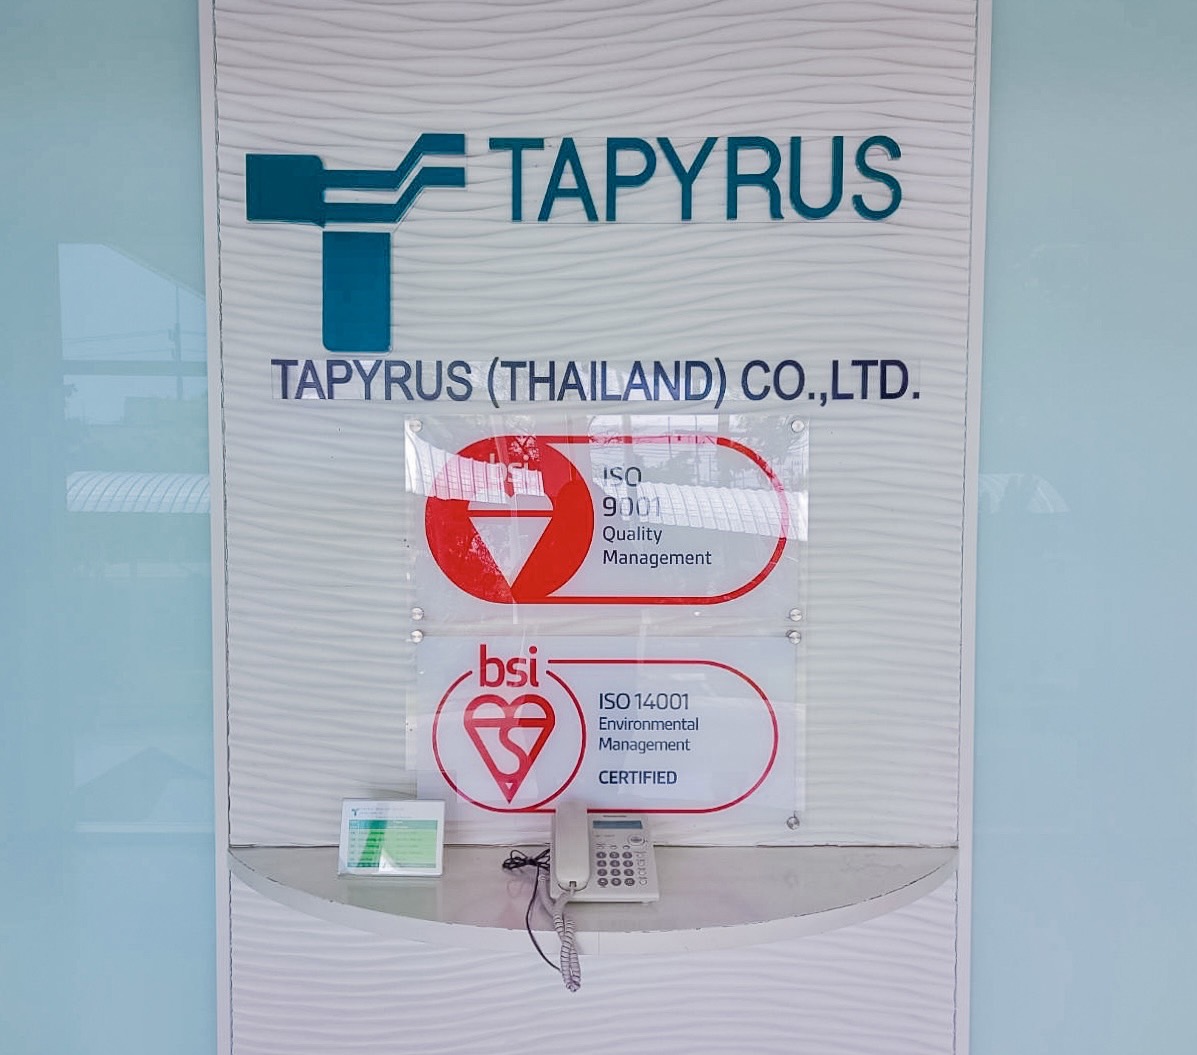 About TAPYRUS